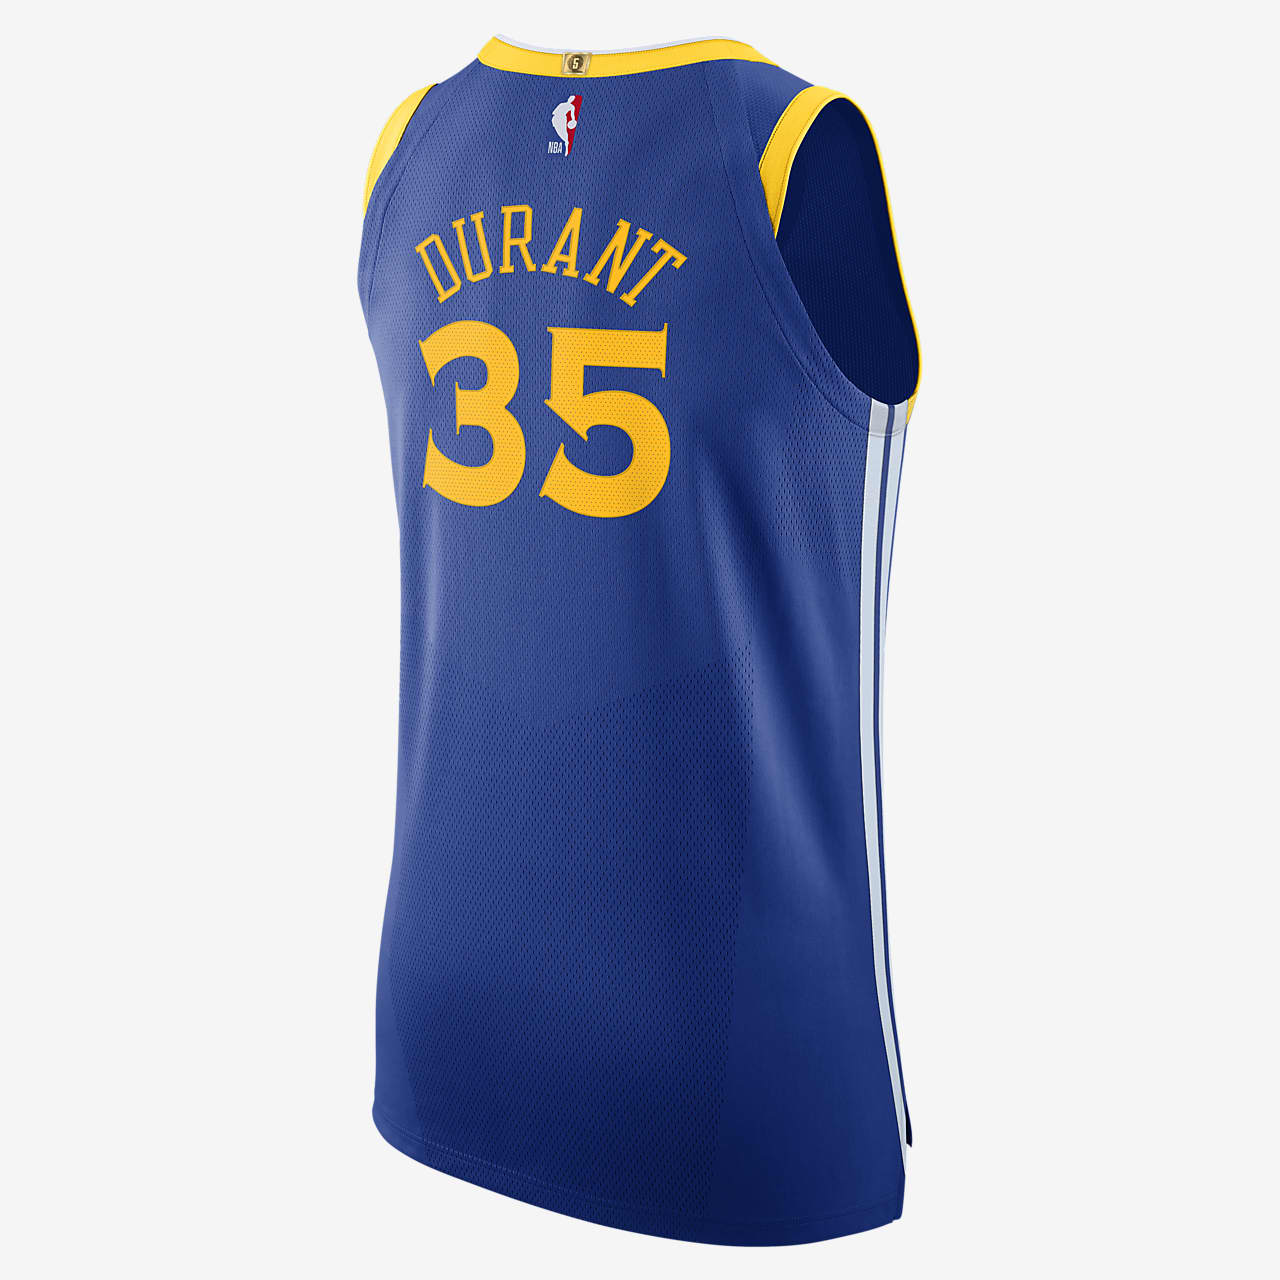 kevin durant back of jersey